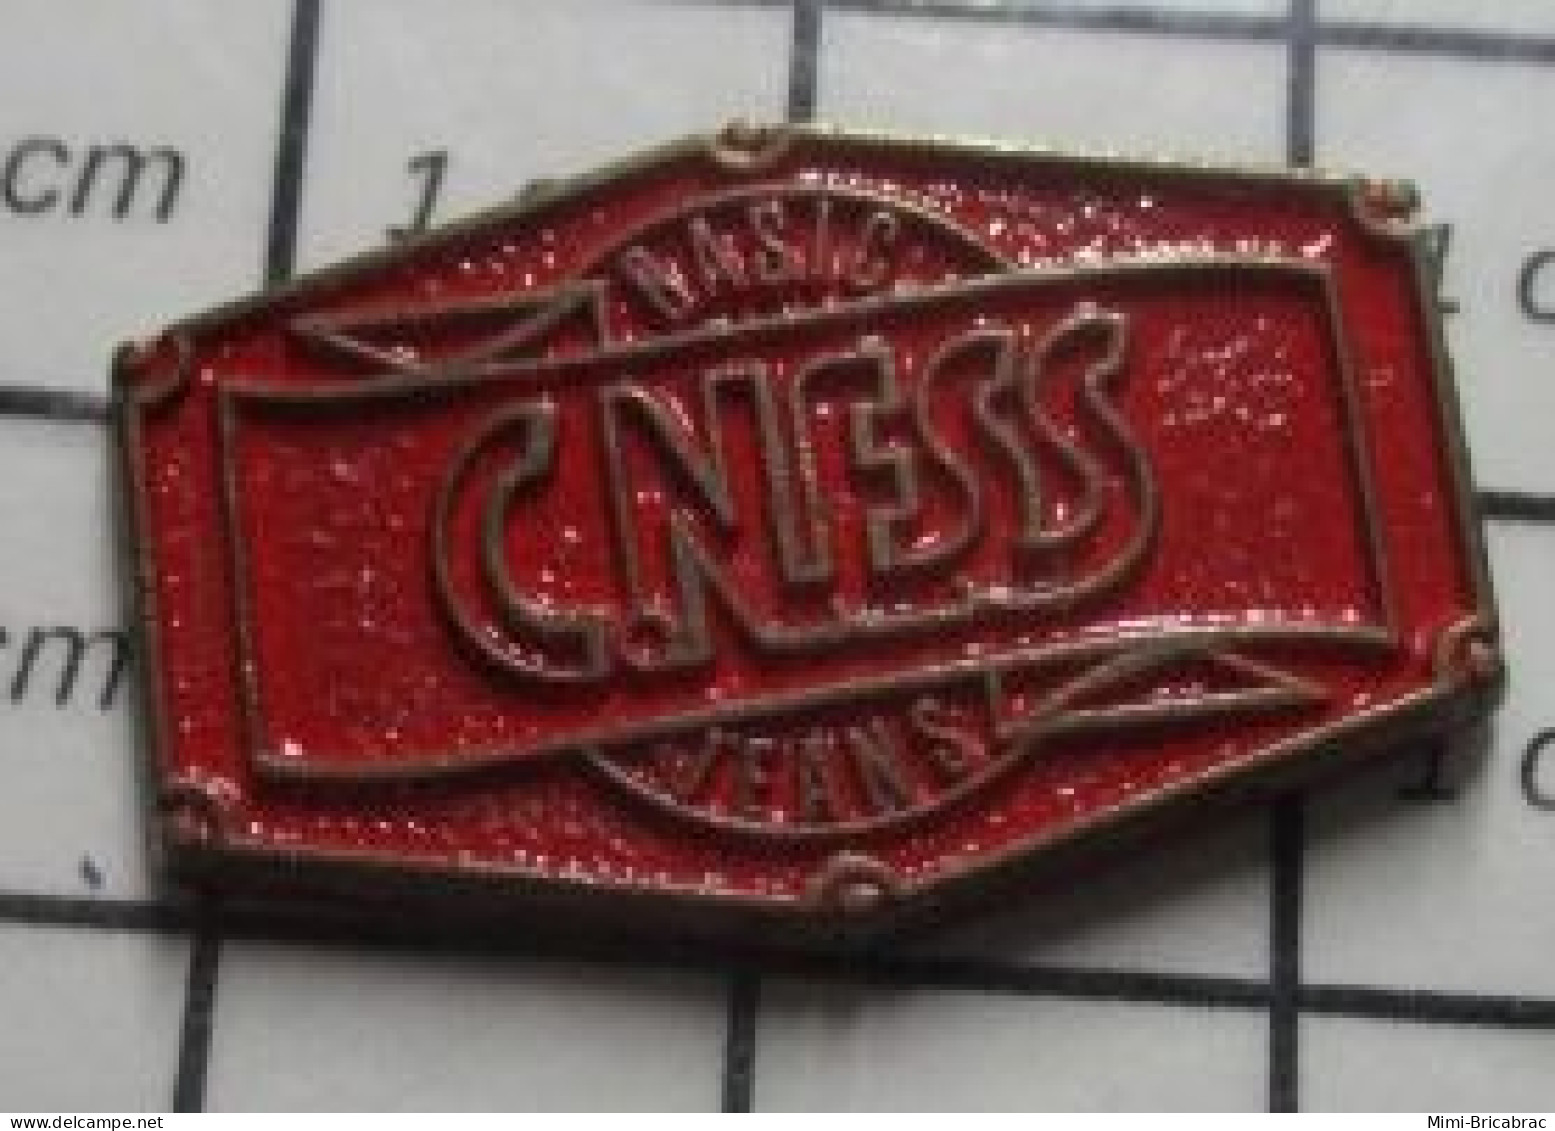 912c Pin's Pins / Beau Et Rare / MARQUES / CNESS BASIC JEAN'S - Trademarks